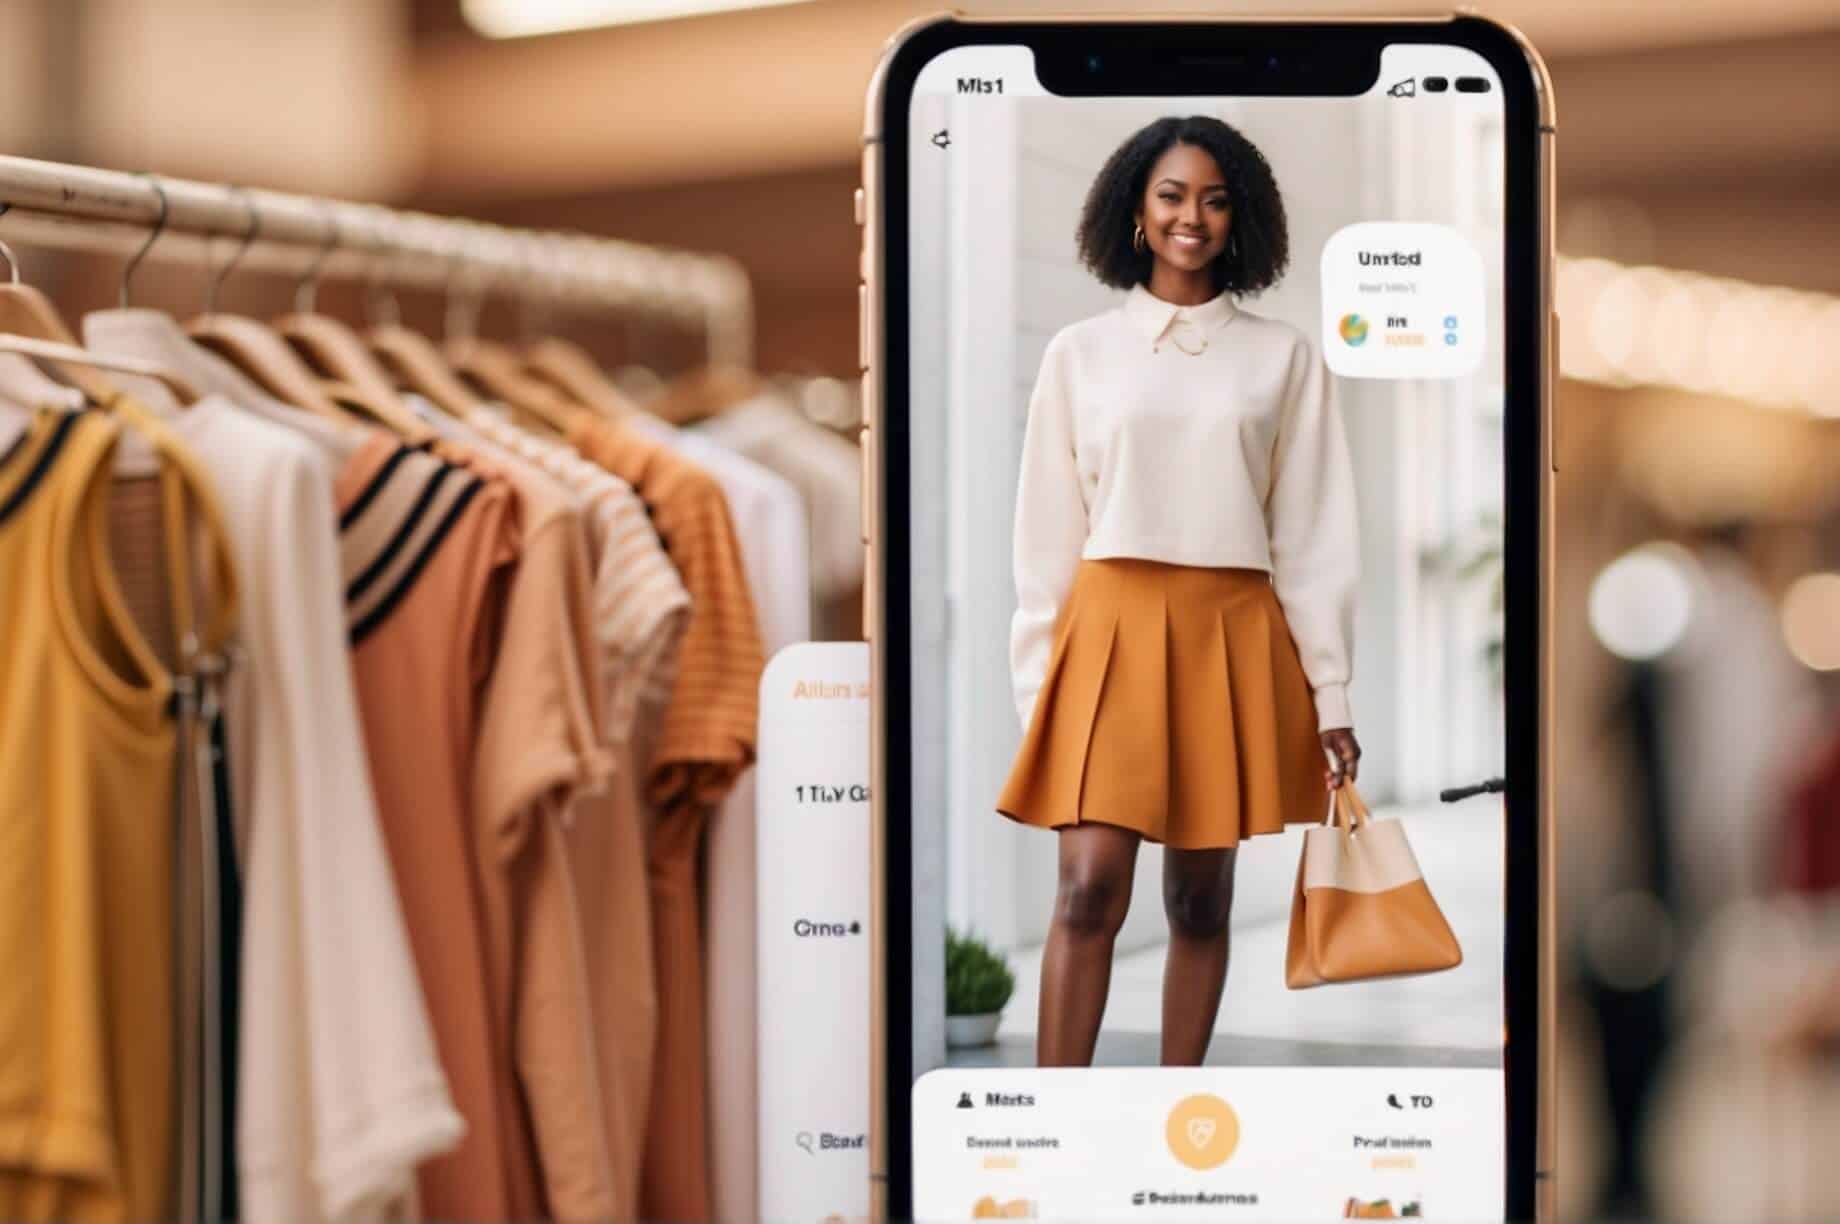 Amazon Introduces Rufus, a New AI-Powered Shopping Assistant in Its Mobile App